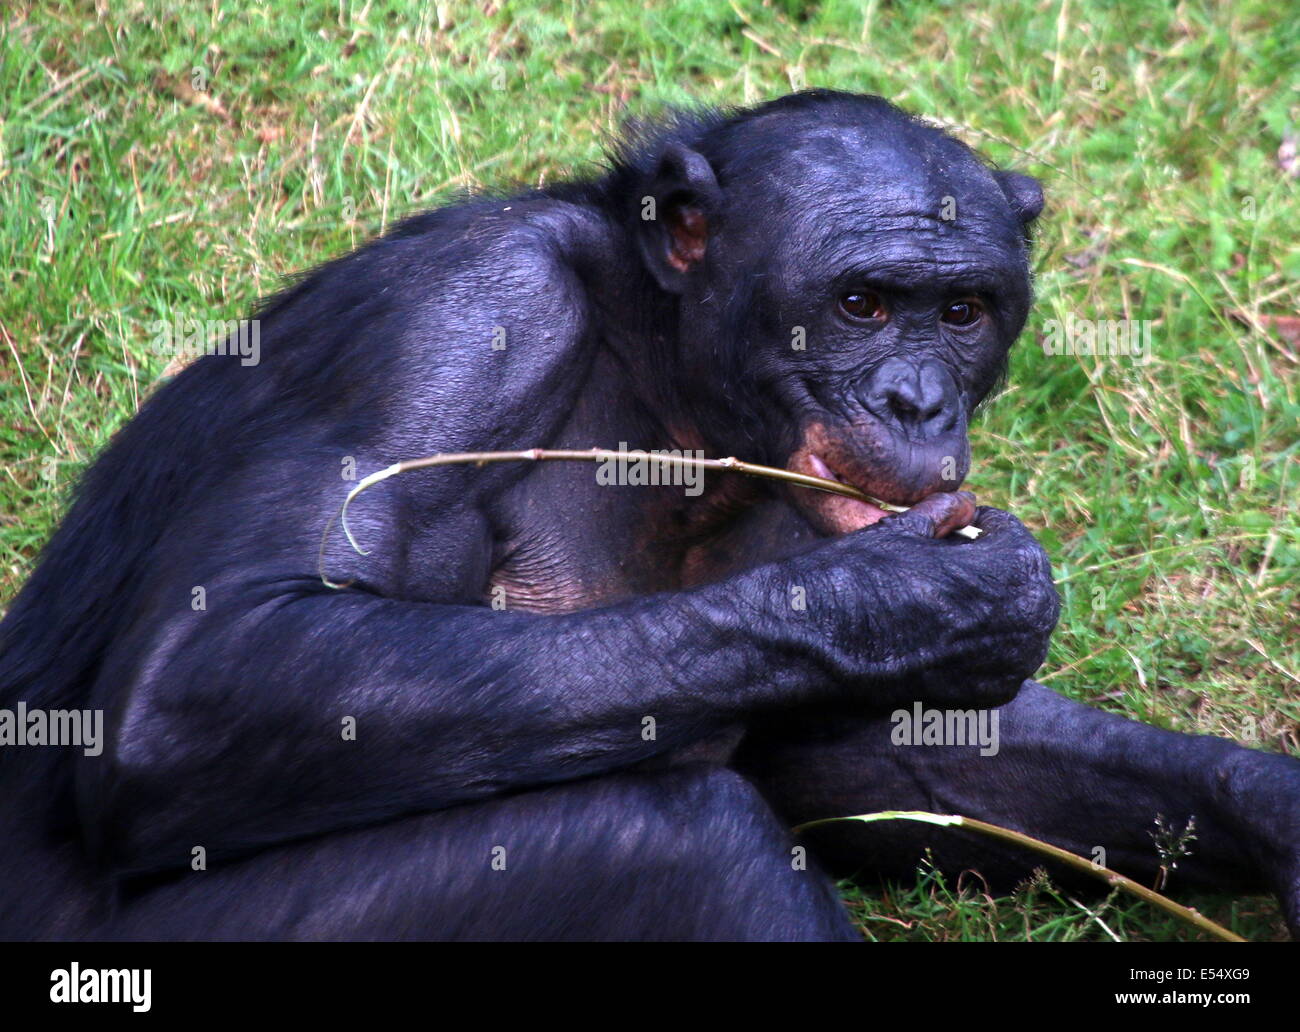 Portrait close-up of a mature male Bonobo or (formerly) Pygmy Chimpanzee (Pan Paniscus) in a natural setting Stock Photo